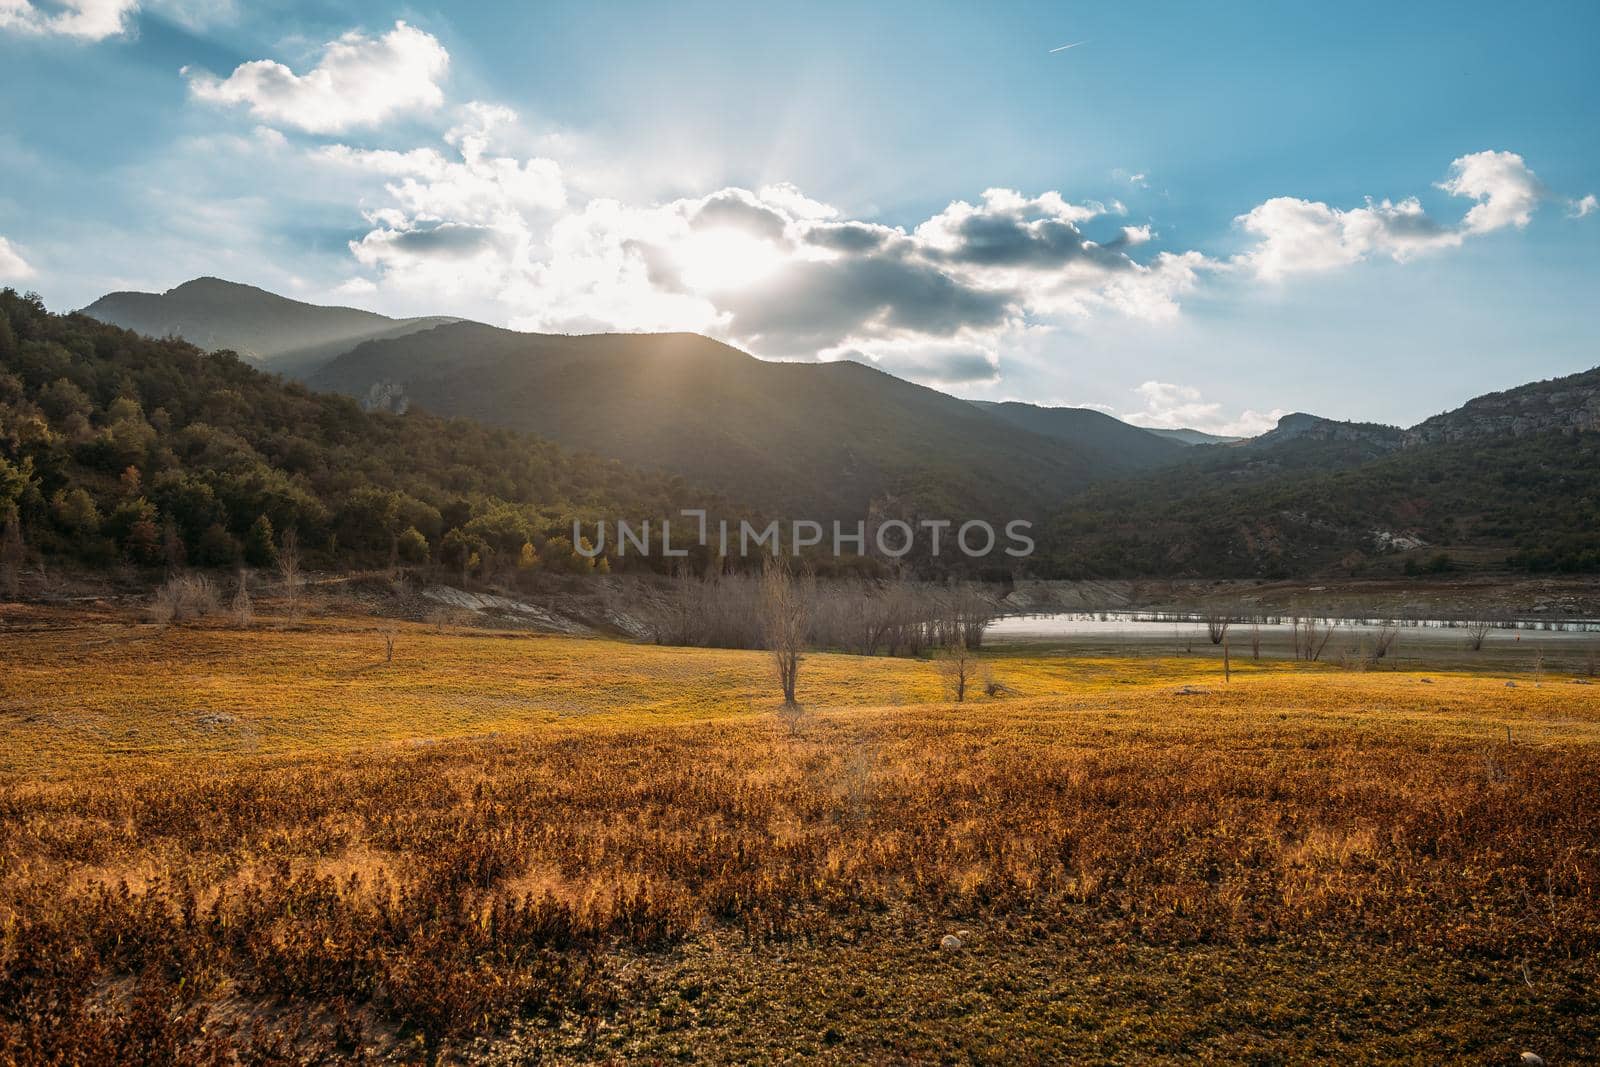 Dawn in the valley in autumn season with orange field and mountains around. Sun shines through the clouds on the blue sky by apavlin